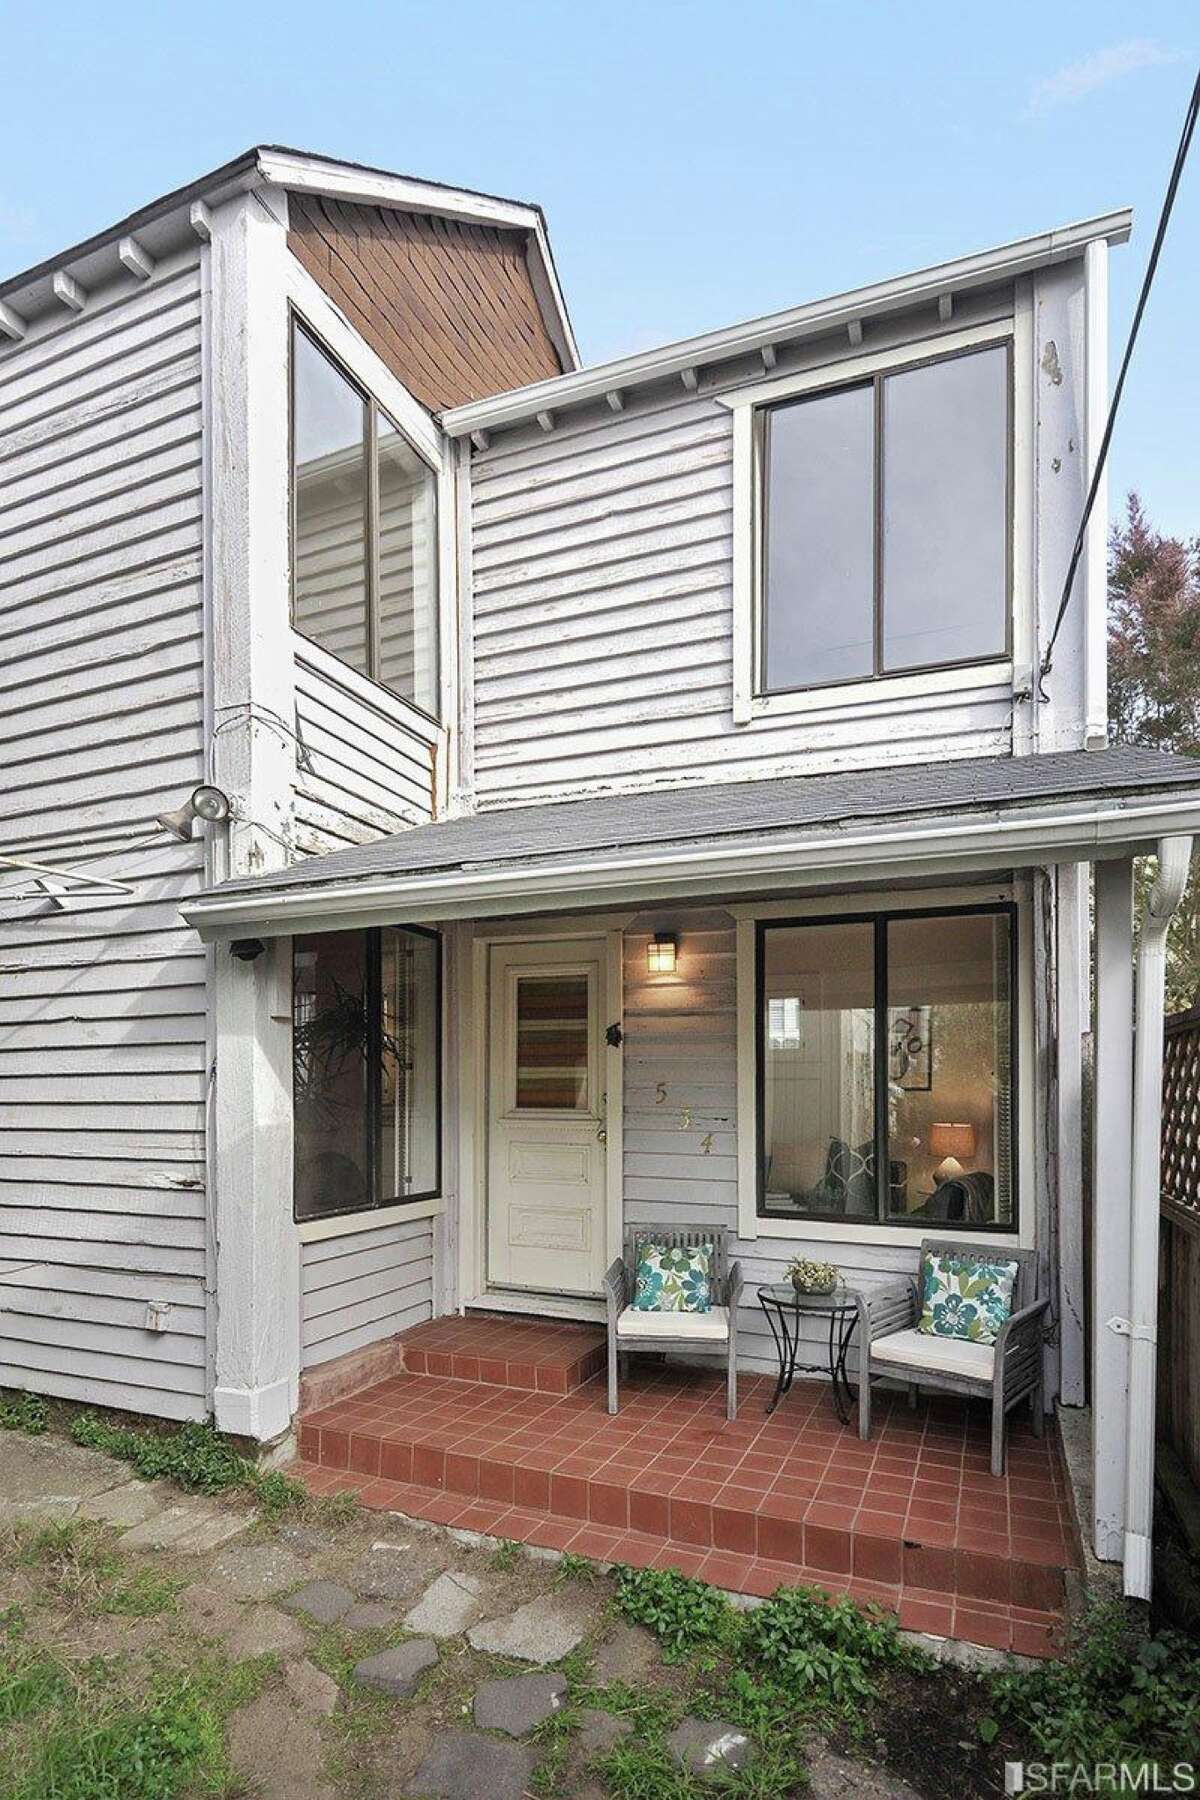 Smallest house on the smallest lot in San Francisco? An 840-square-foot, two-level home that occupies a 644-square-foot lot in the city's Sutro Heights neighborhood just might be, according to listing agent Heather Stoltz. The two-bedroom cottage sold for $61,000 over asking in Jan. 2016.